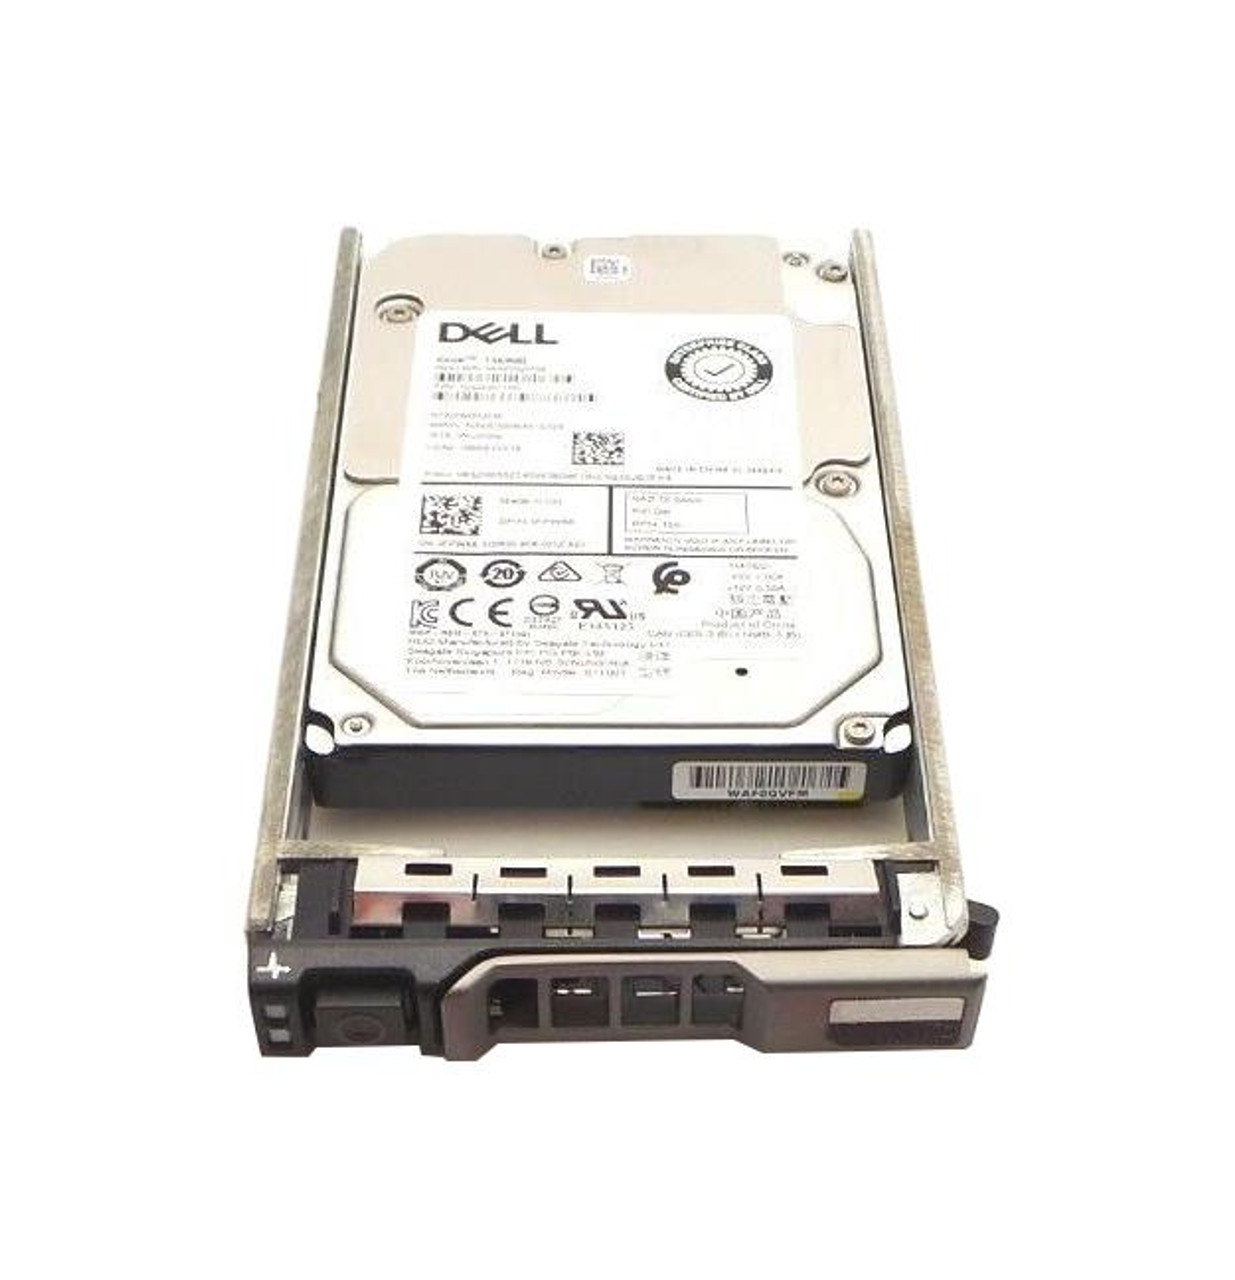 400-AOXT Dell 300GB 10000RPM SAS 12Gbps Dual Port 2.5-inch Internal Hard Drive with Tray